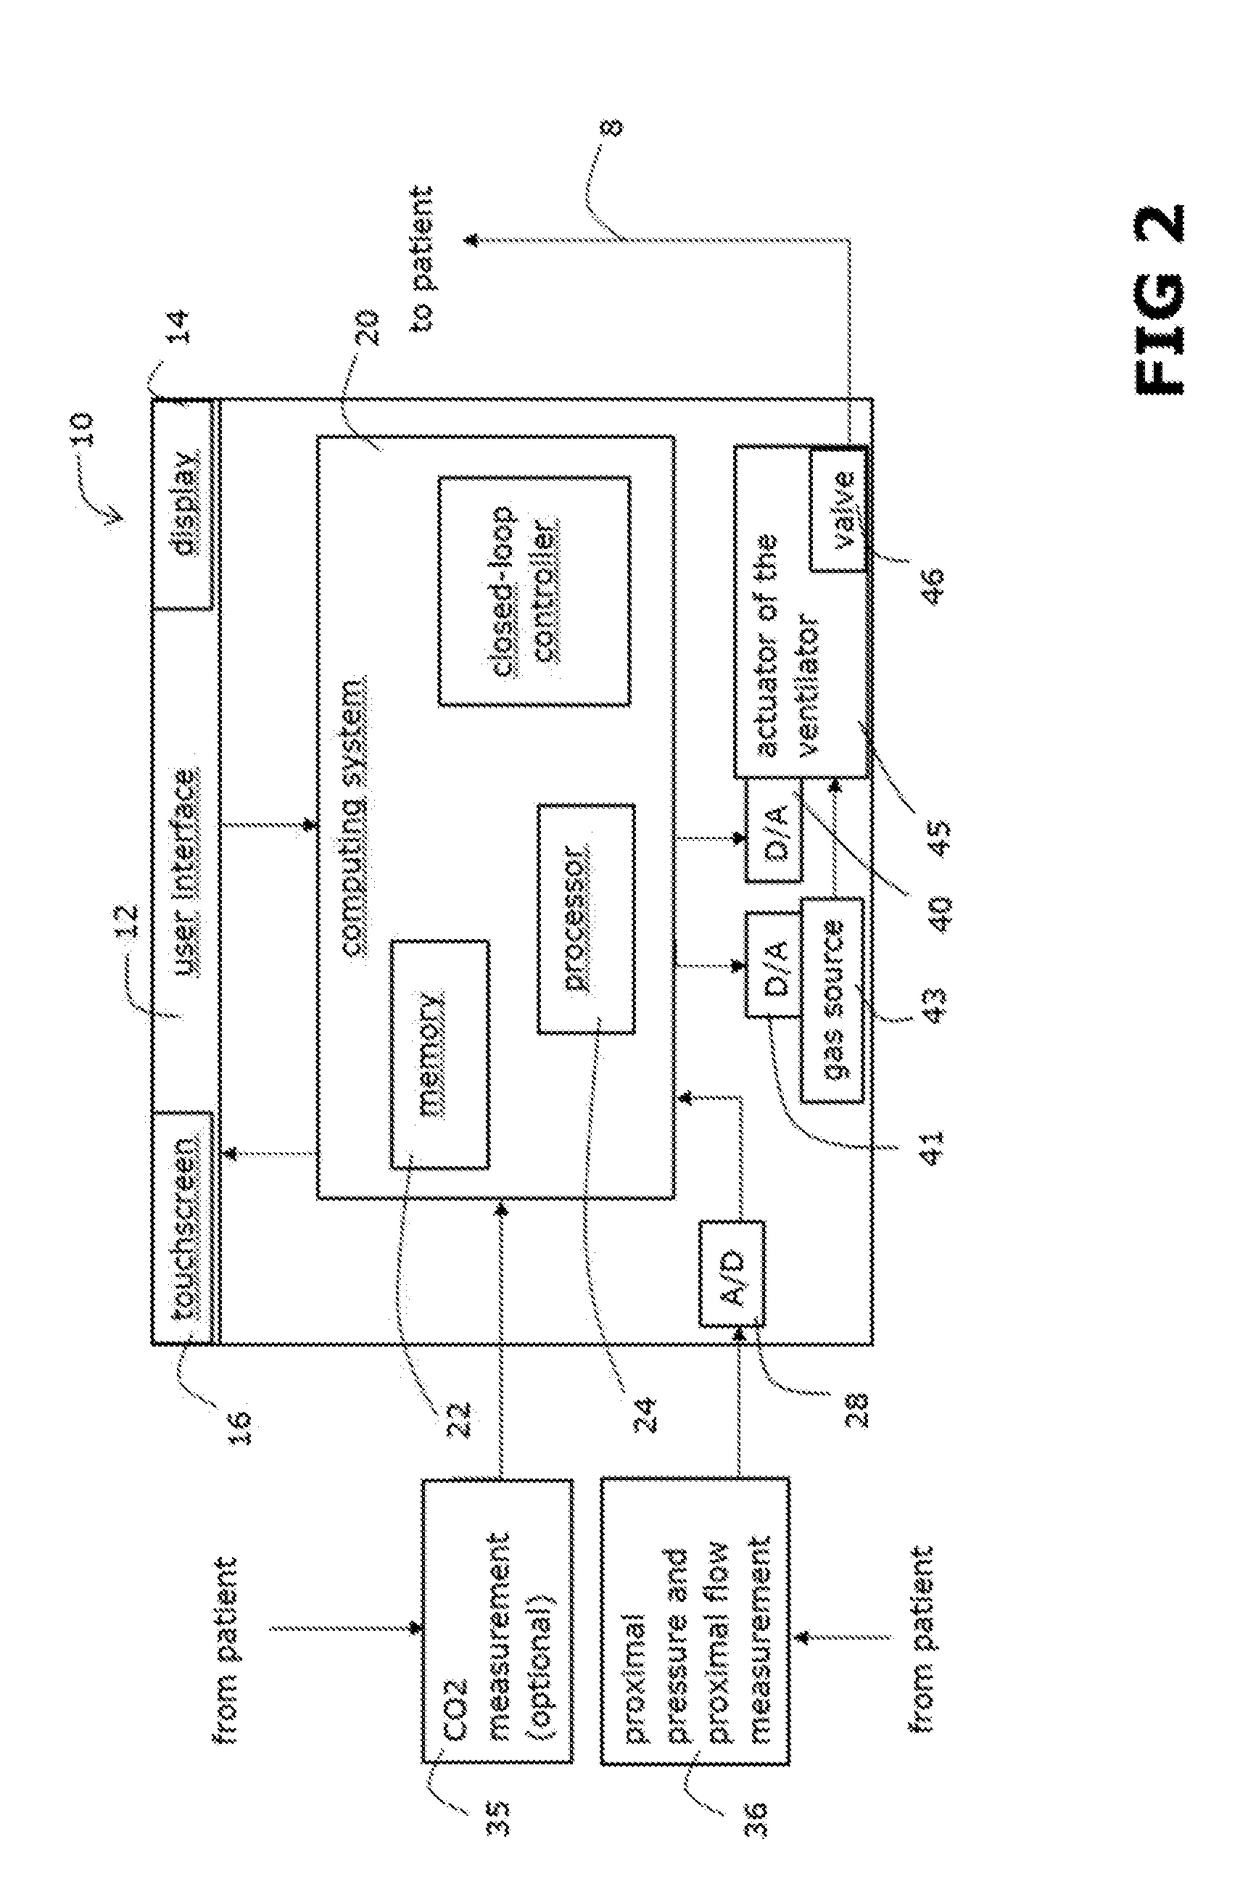 Ventilator apparatus and method for operating a ventilator in said ventilator apparatus